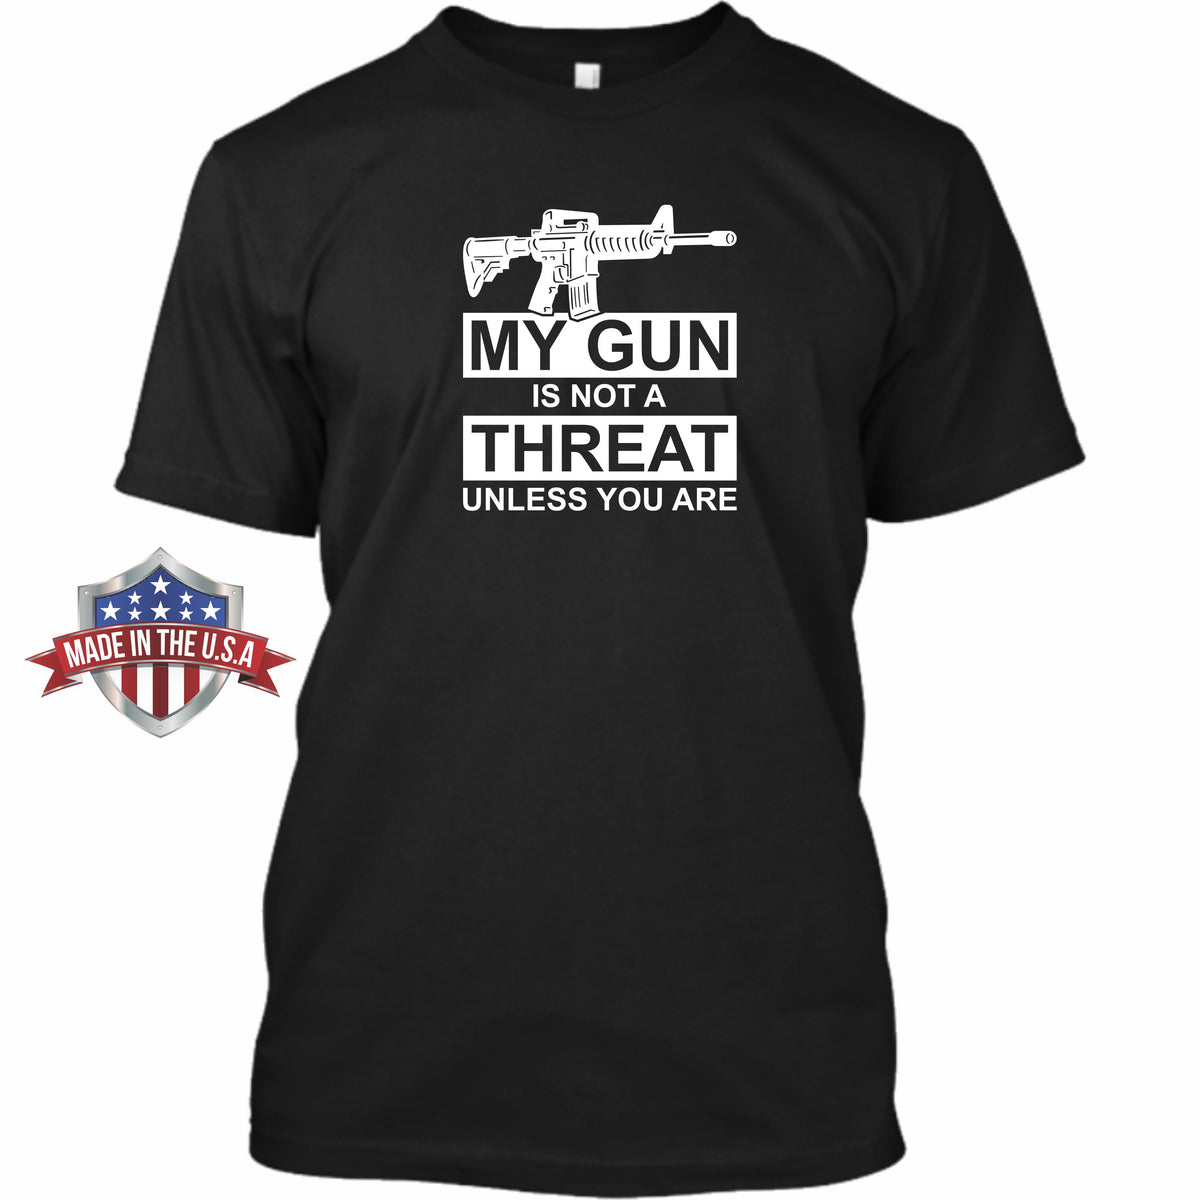 My Gun Is Not A Threat - Unless Your Are